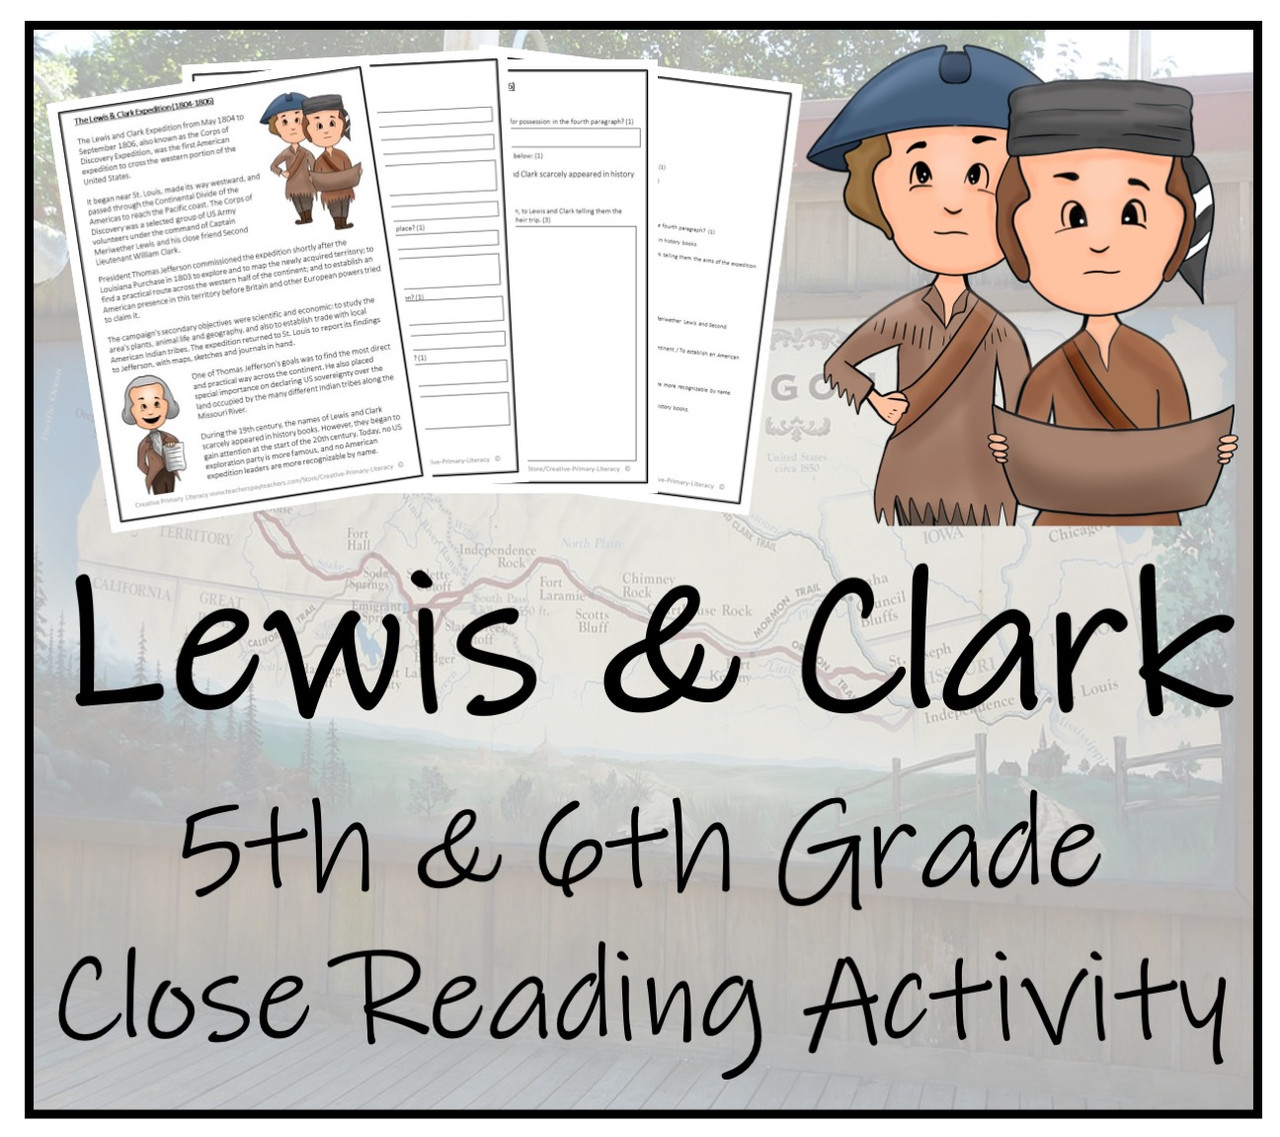 Lewis clark expedition close reading activity th grade th grade